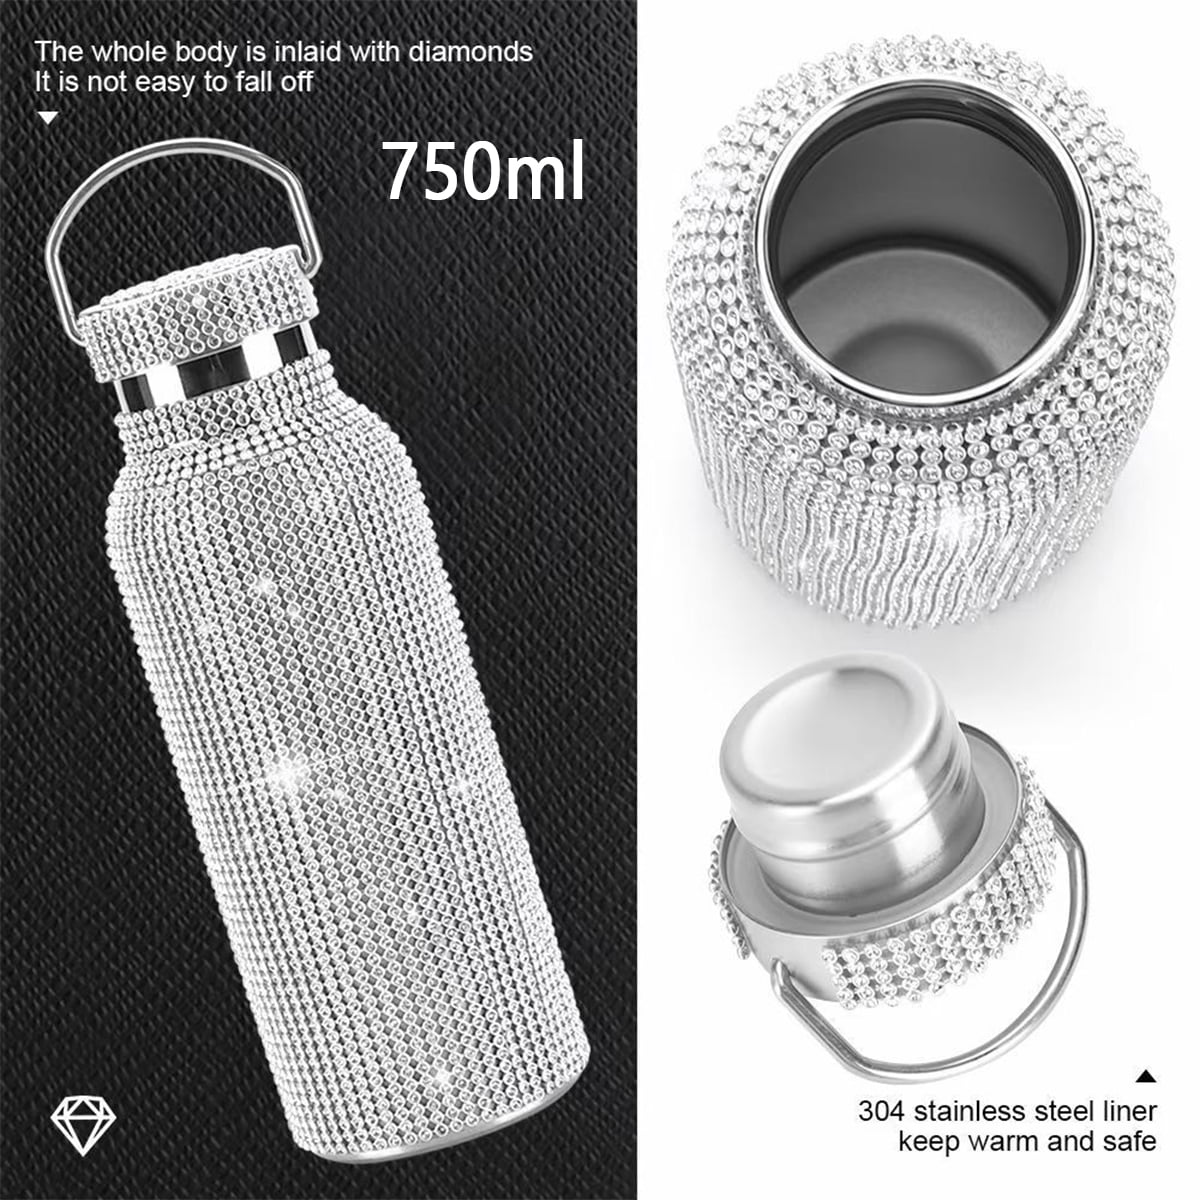 500ml Bling Rhinestone Stainless Steel Thermos/Water Bottle with Handle & Chain